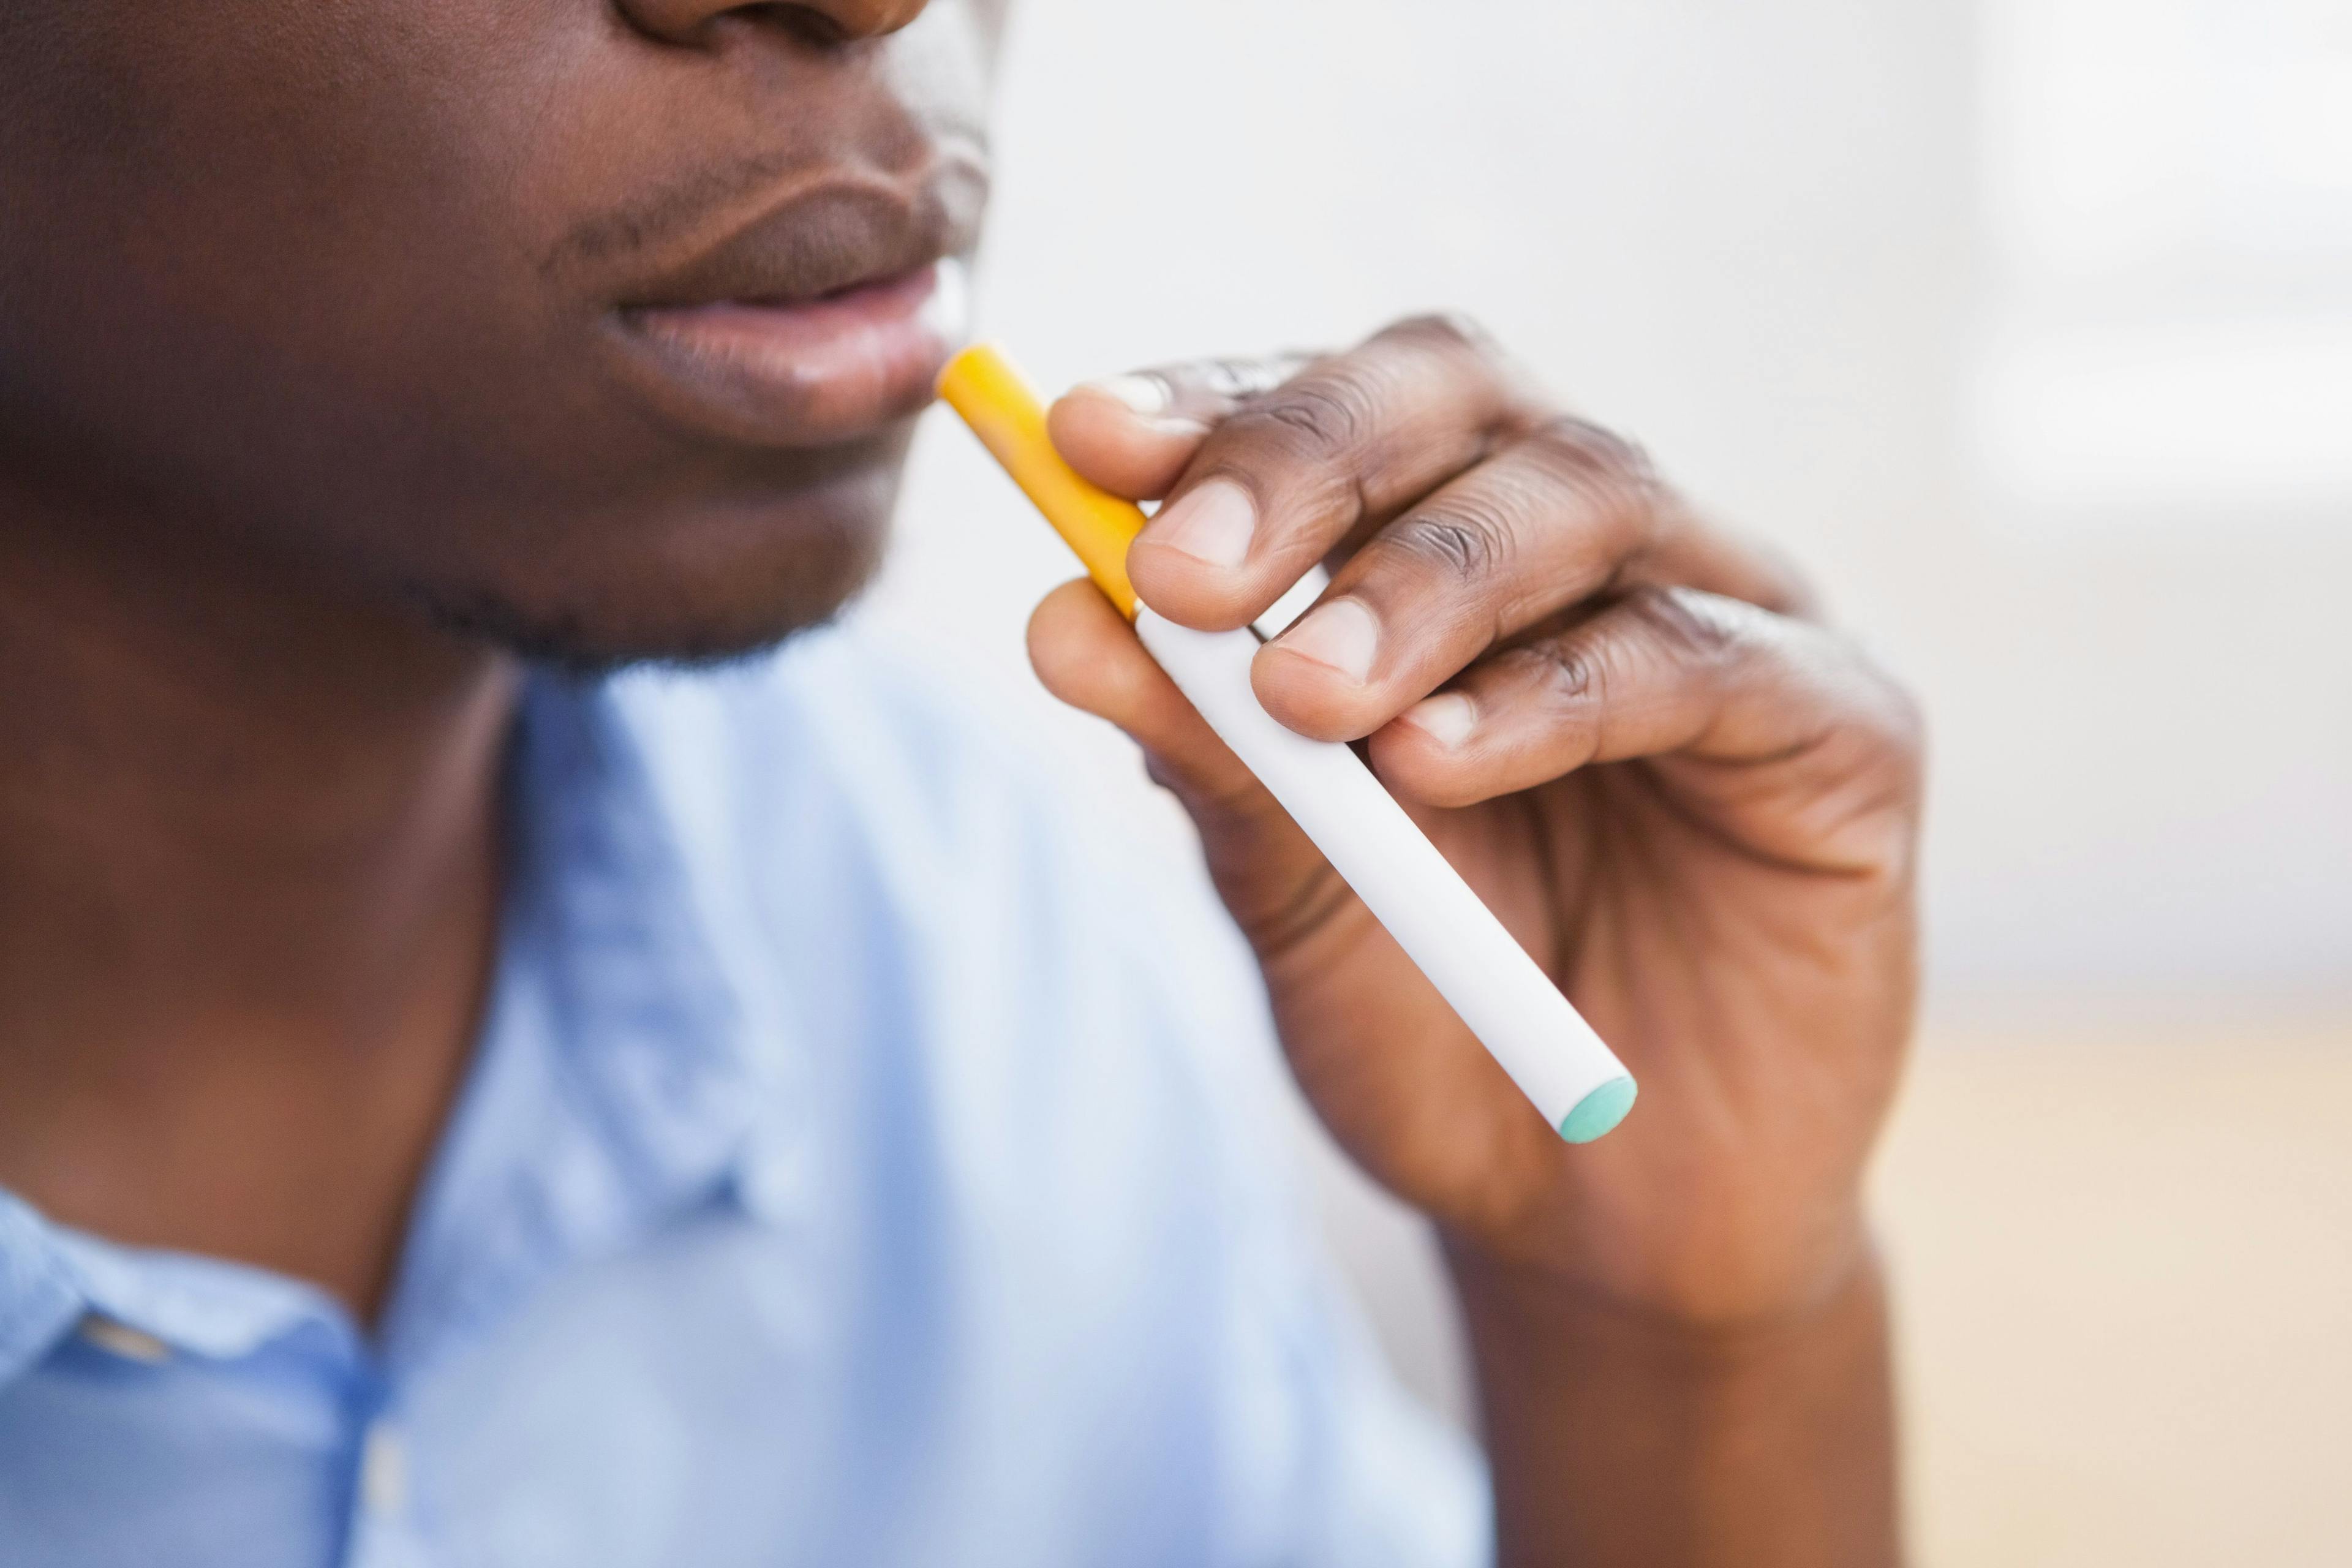 It takes a village: community interventions to address teen e-cigarette use